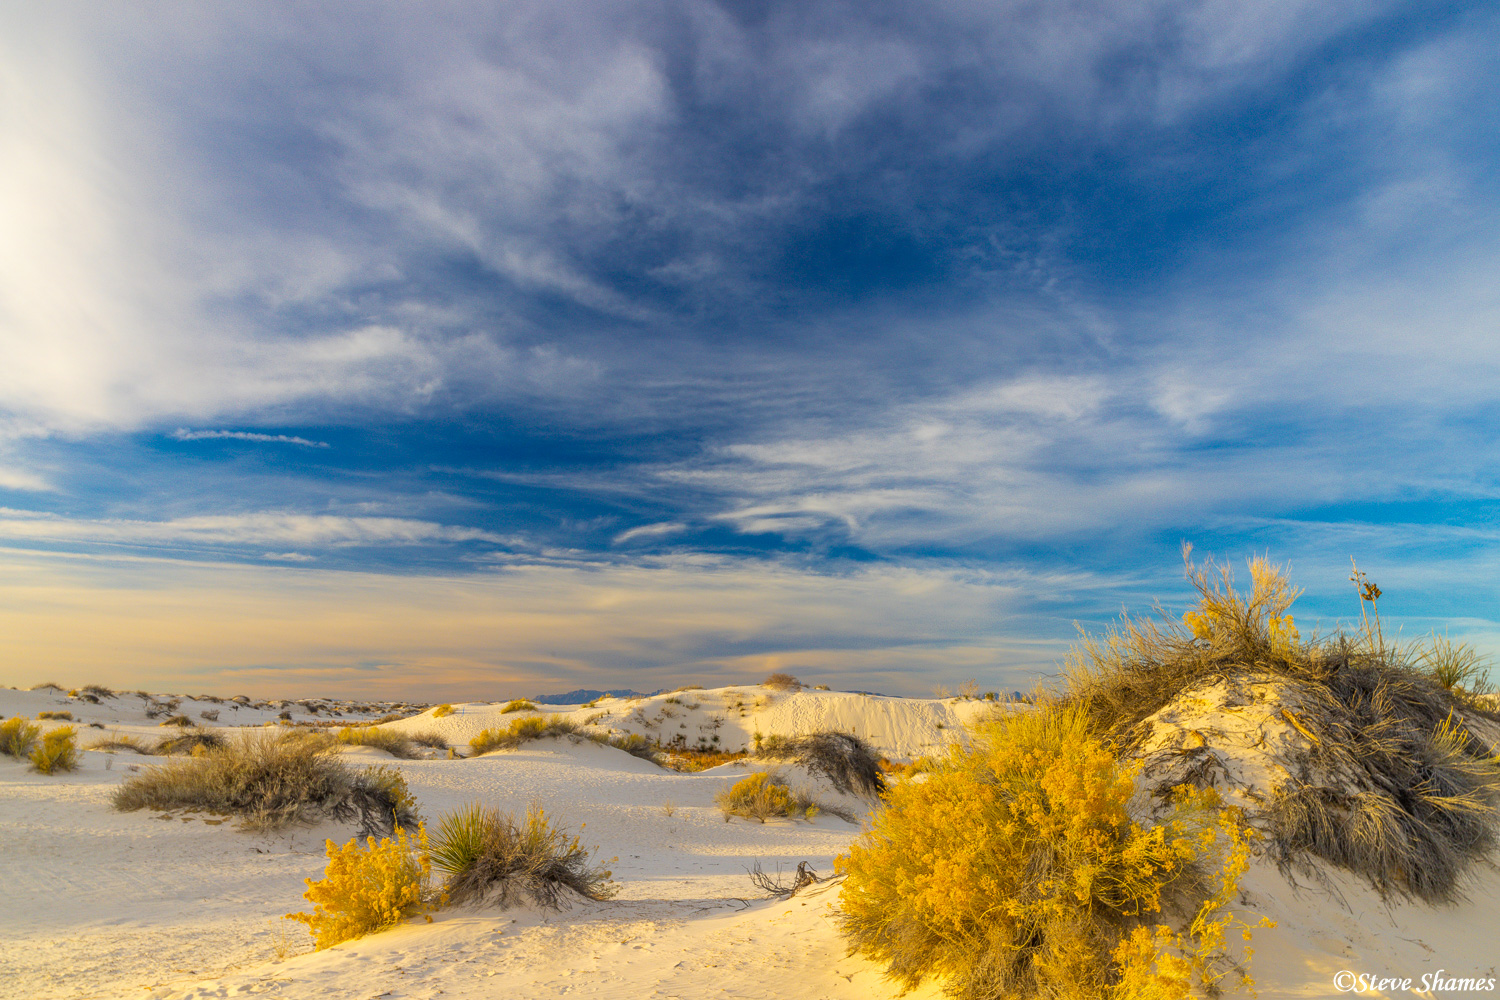 A big cloudy sky over White Sands.